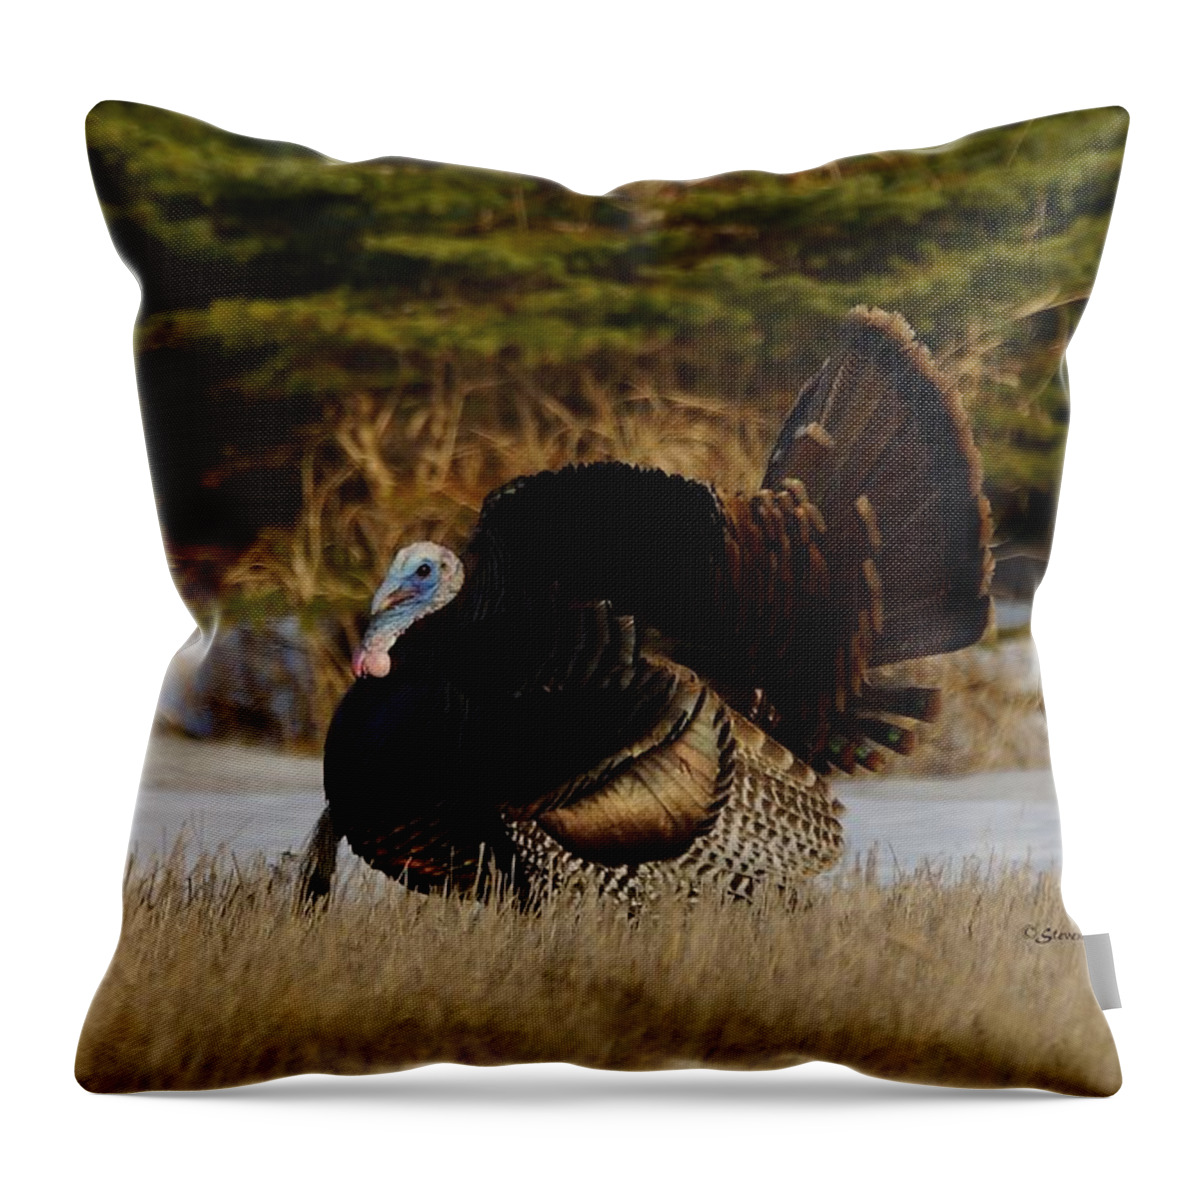 Turkey Throw Pillow featuring the photograph Tom Turkey by Steven Clipperton